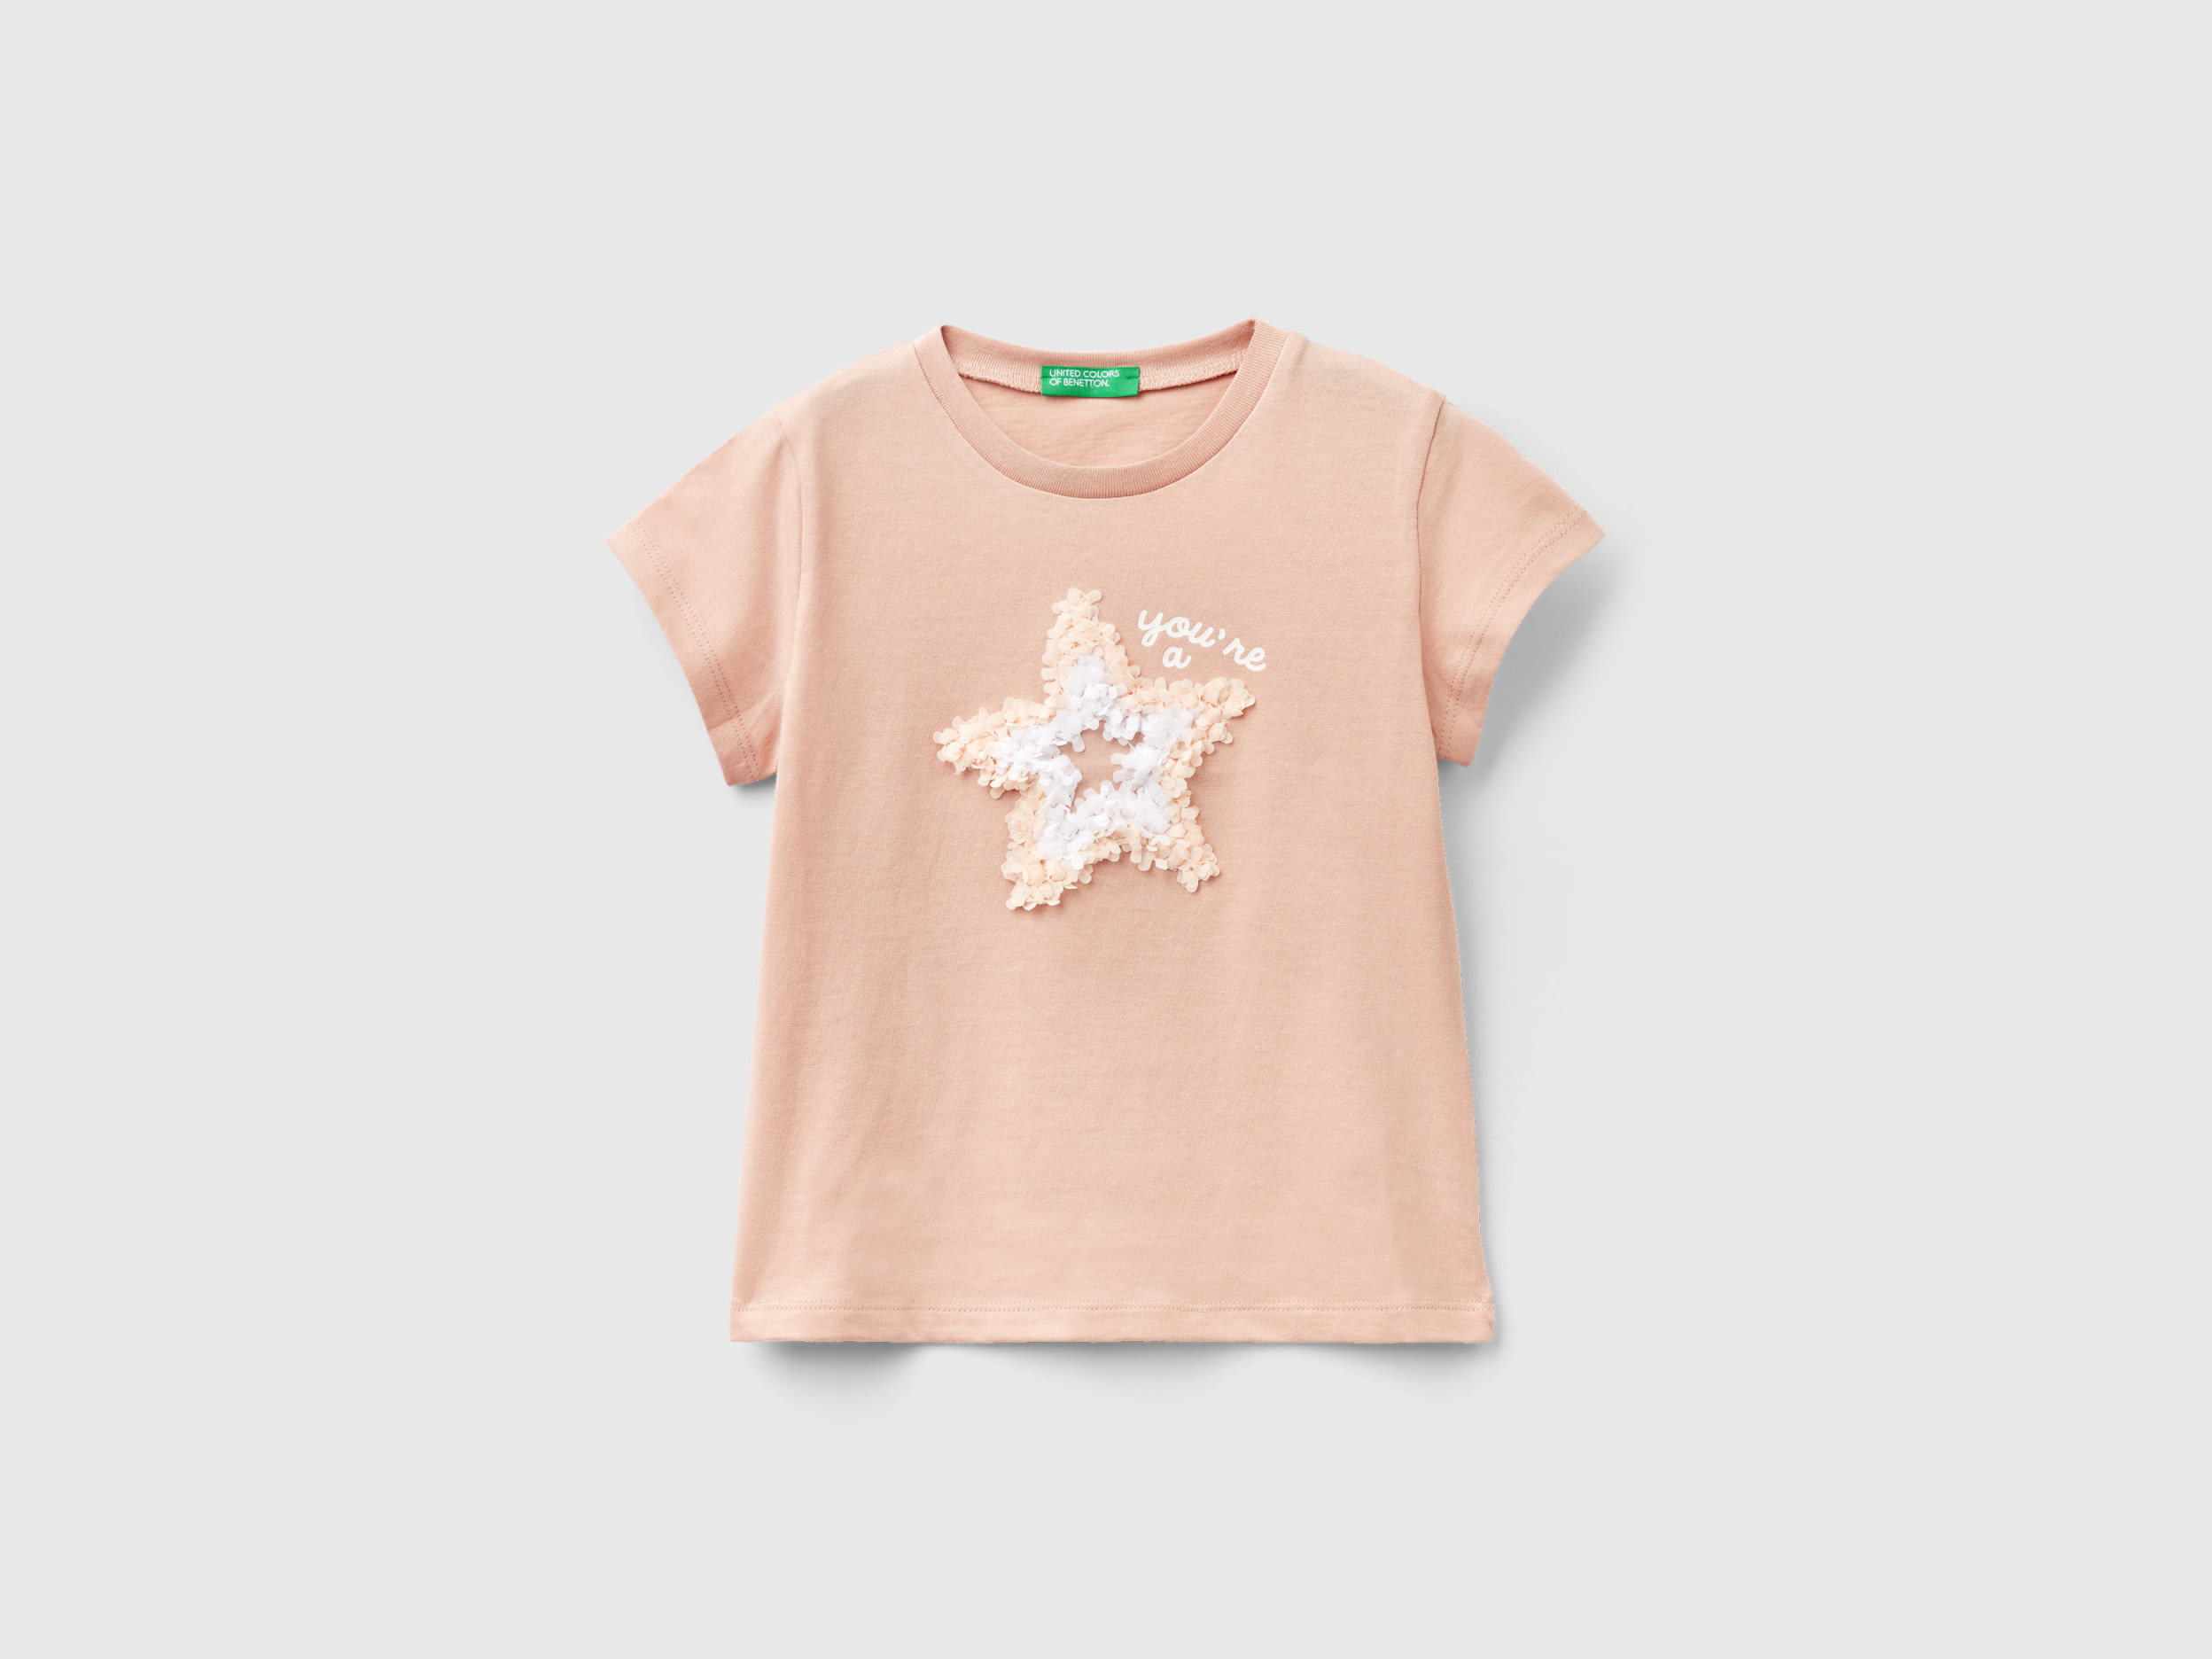 Image of Benetton, T-shirt With Petal Effect Applique, size 110, Nude, Kids